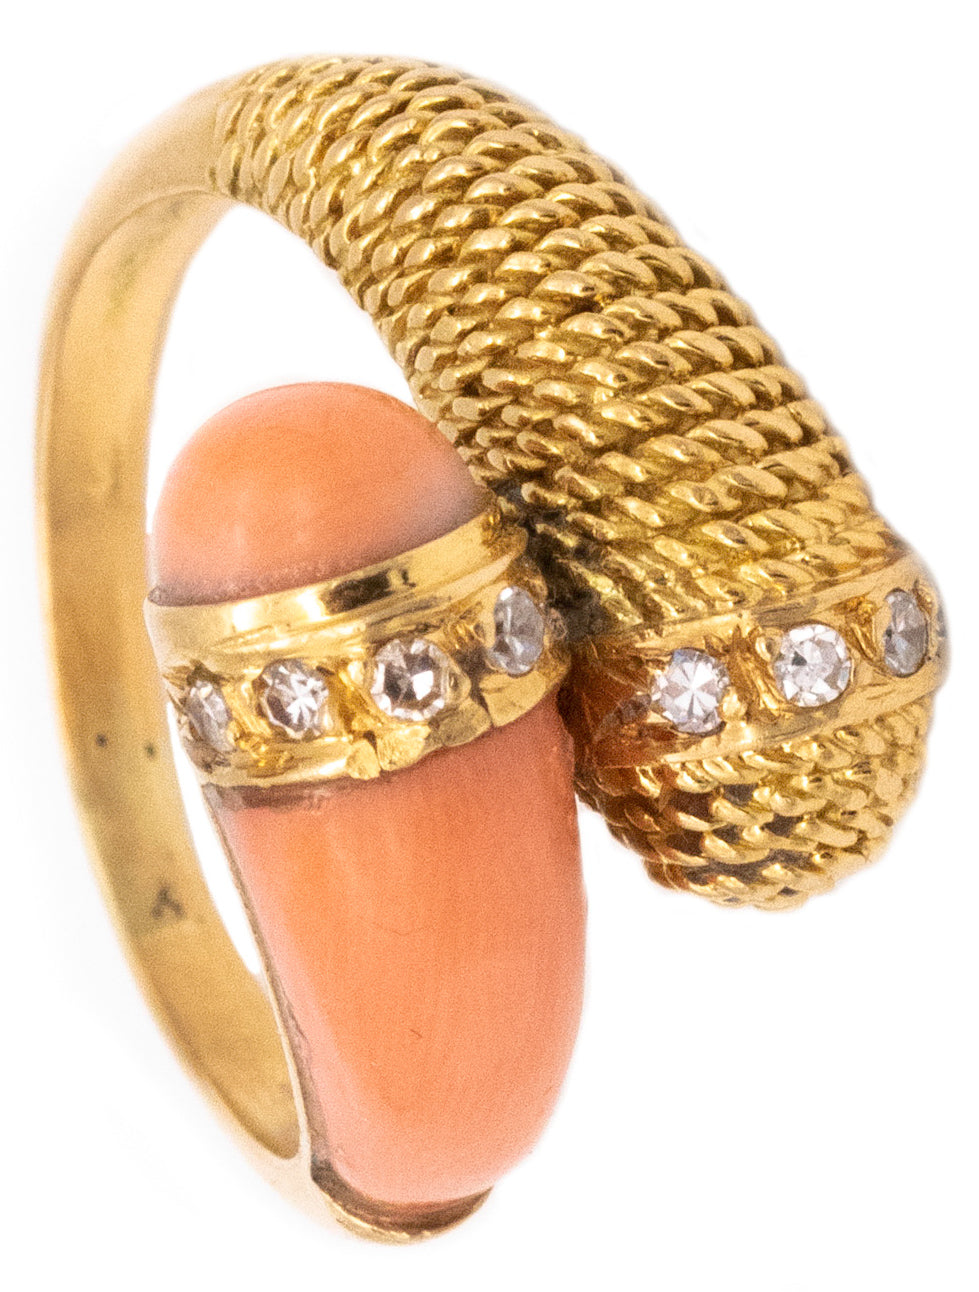 Mauboussin 1960 Paris Toi Et Moi Ring In 18Kt Gold With Diamonds And Carved Coral